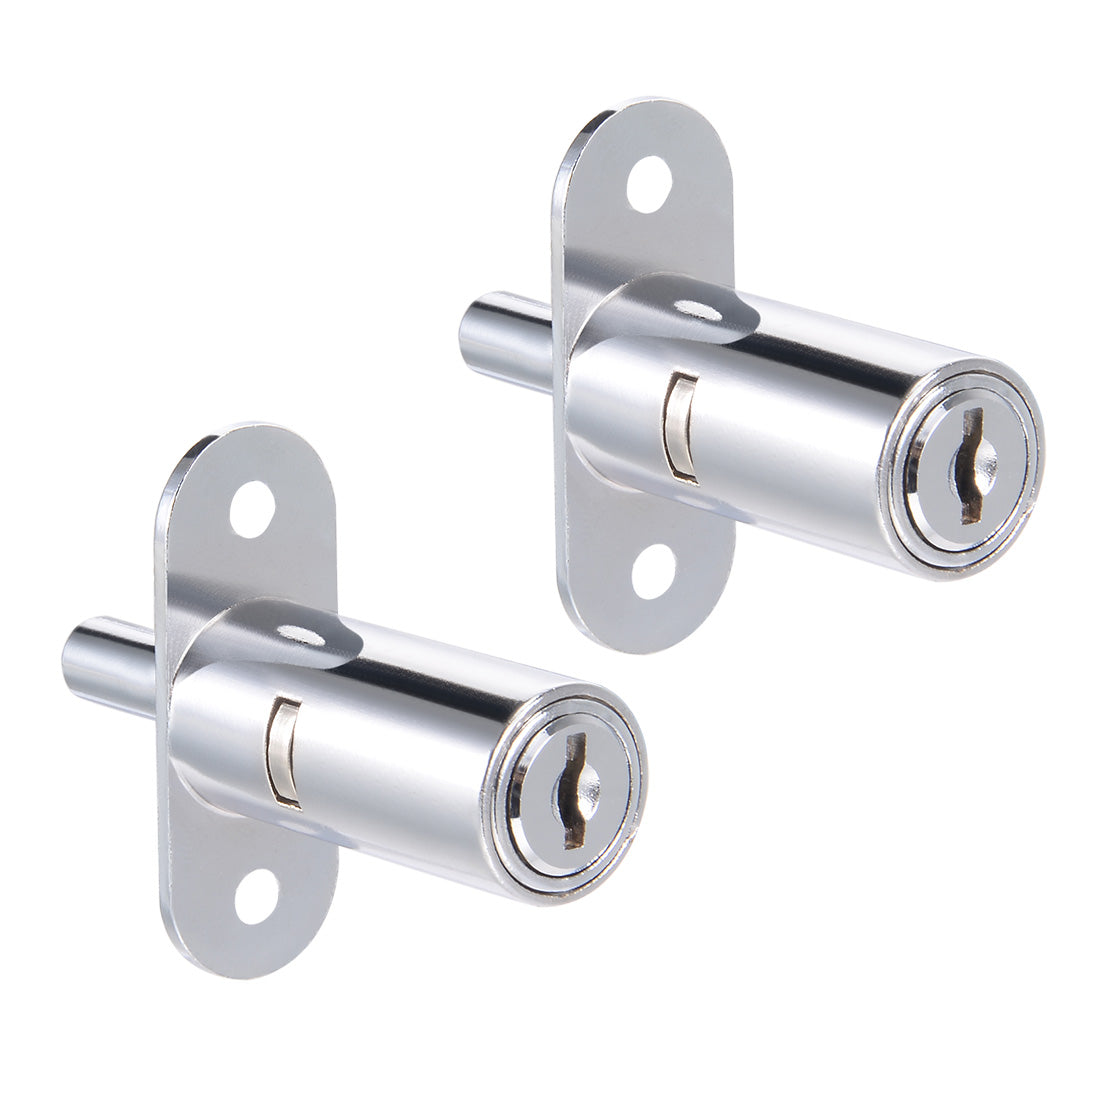 uxcell Uxcell Push Plunger Lock, 19mm x 40mm Cylinder Zinc Alloy Keyed Different 2Pcs